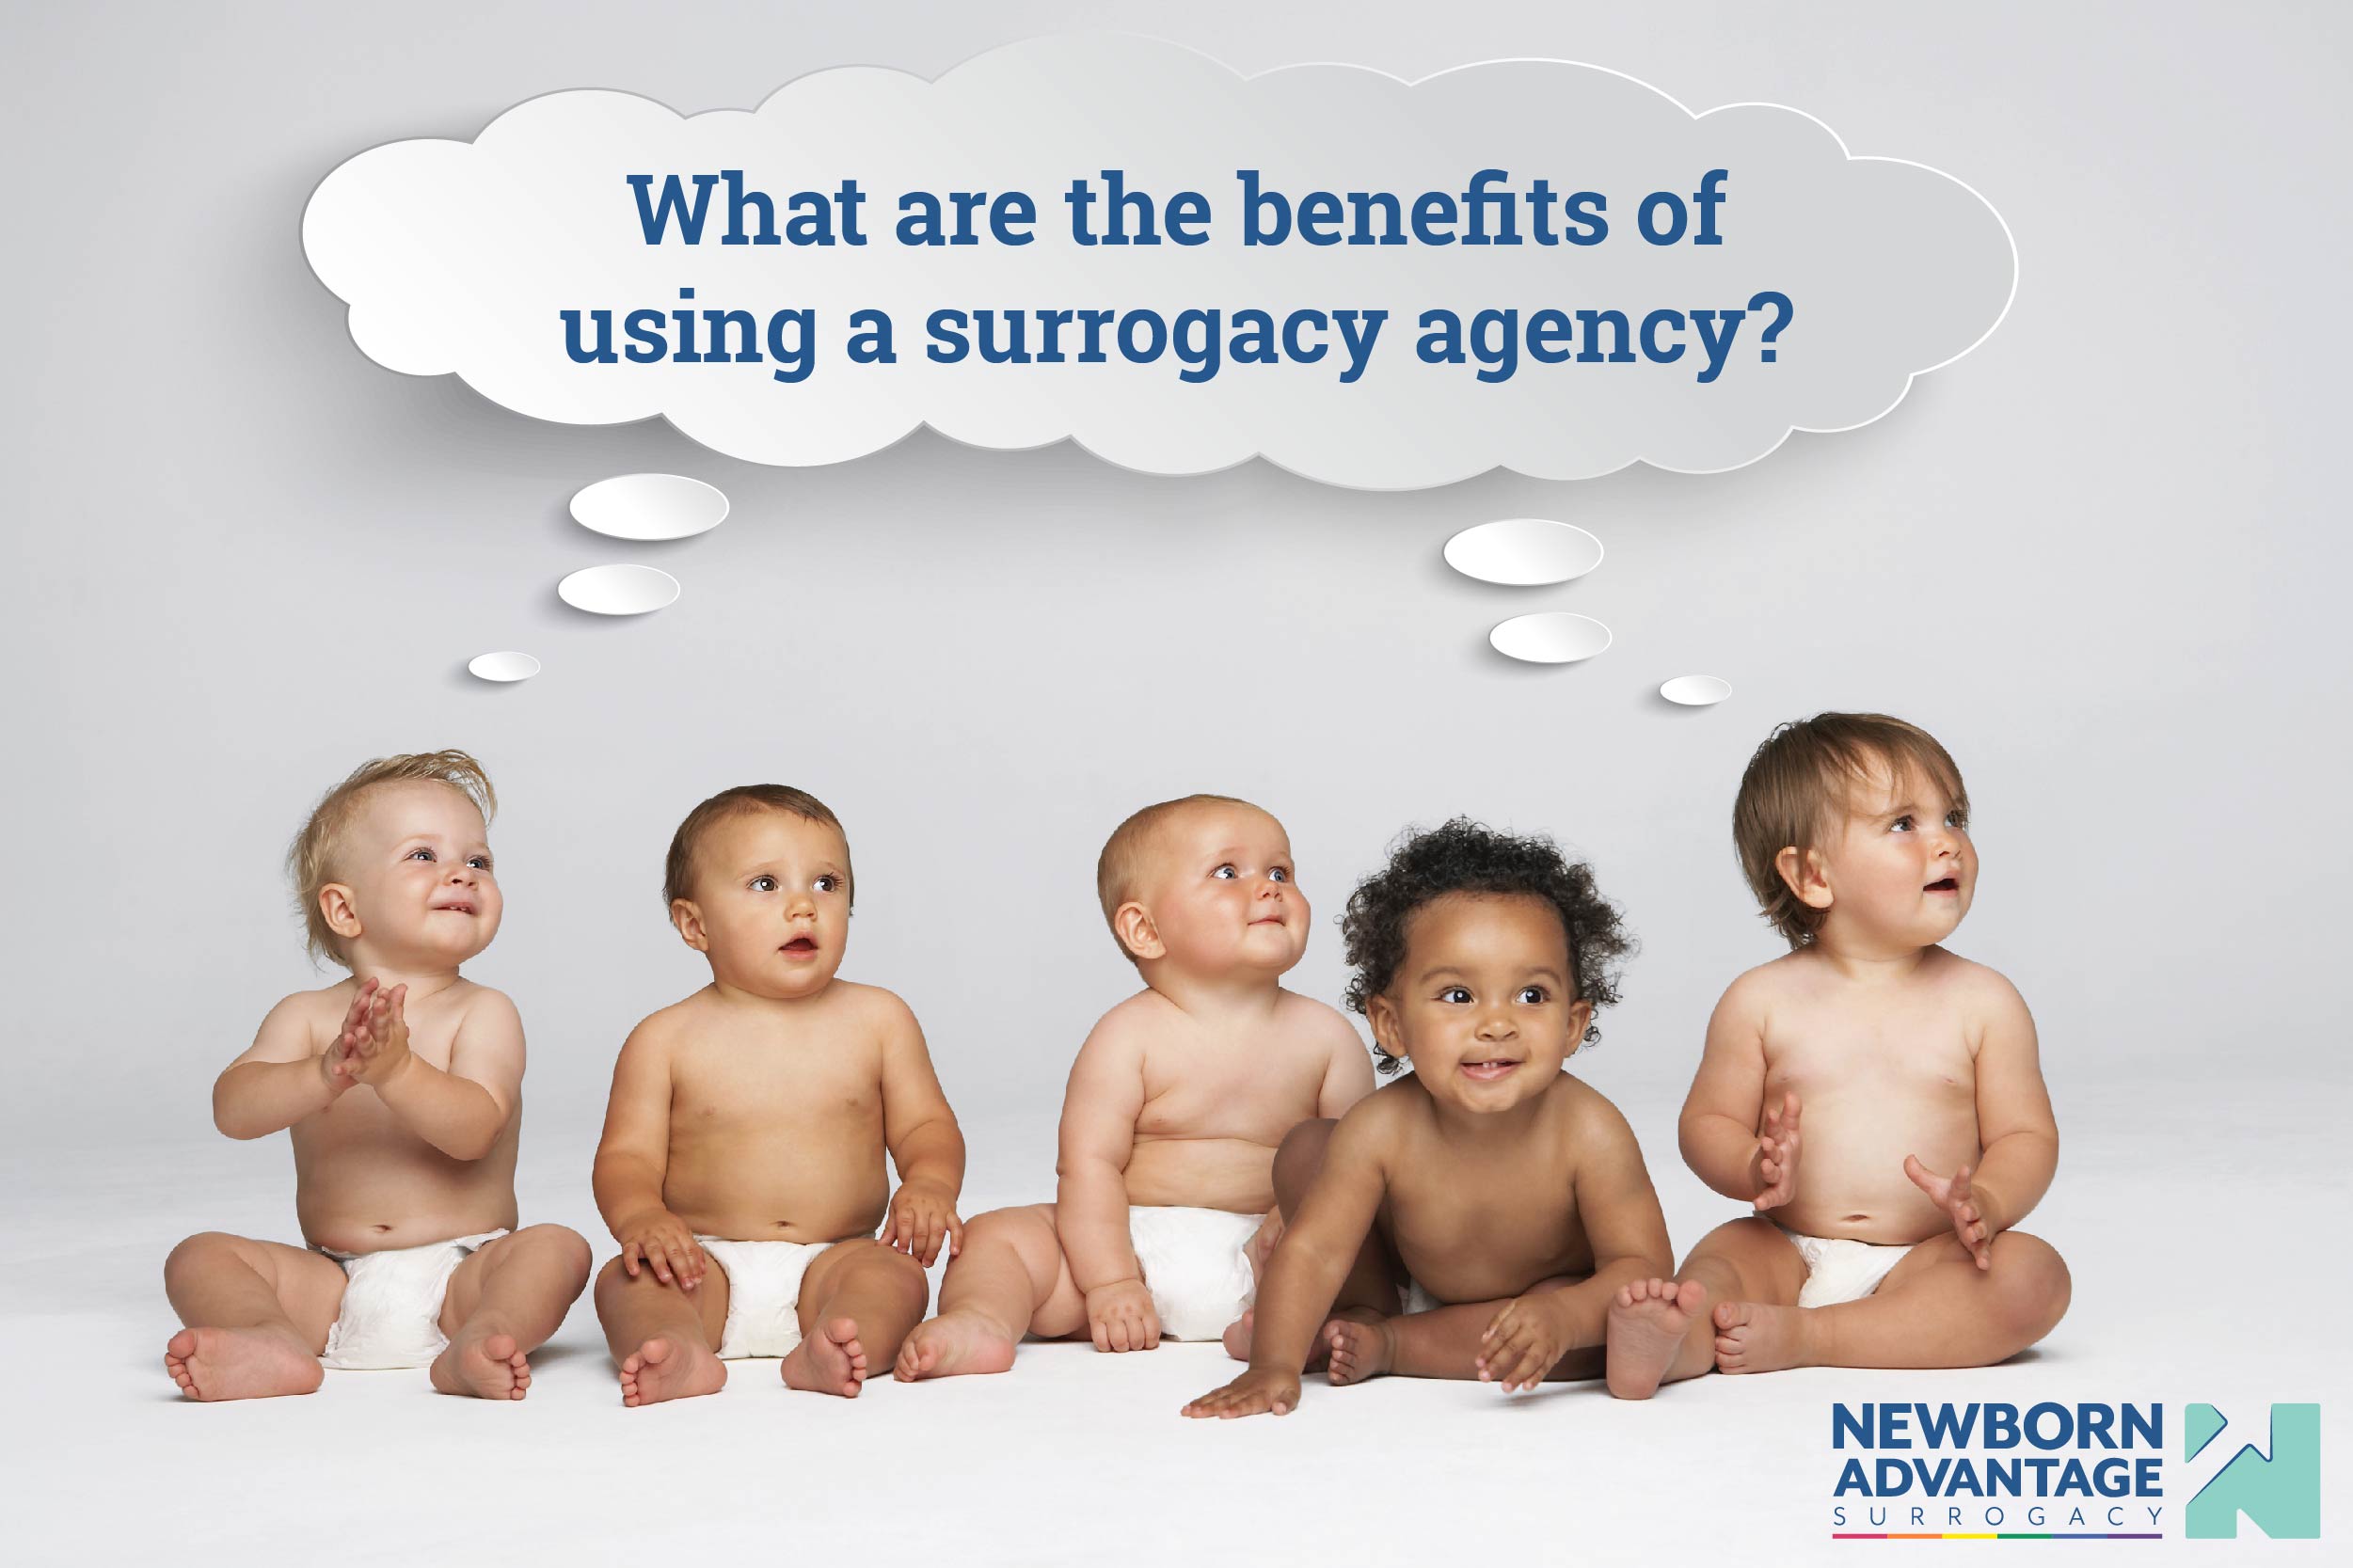 What Are the Benefits of Using a Surrogacy Agency?